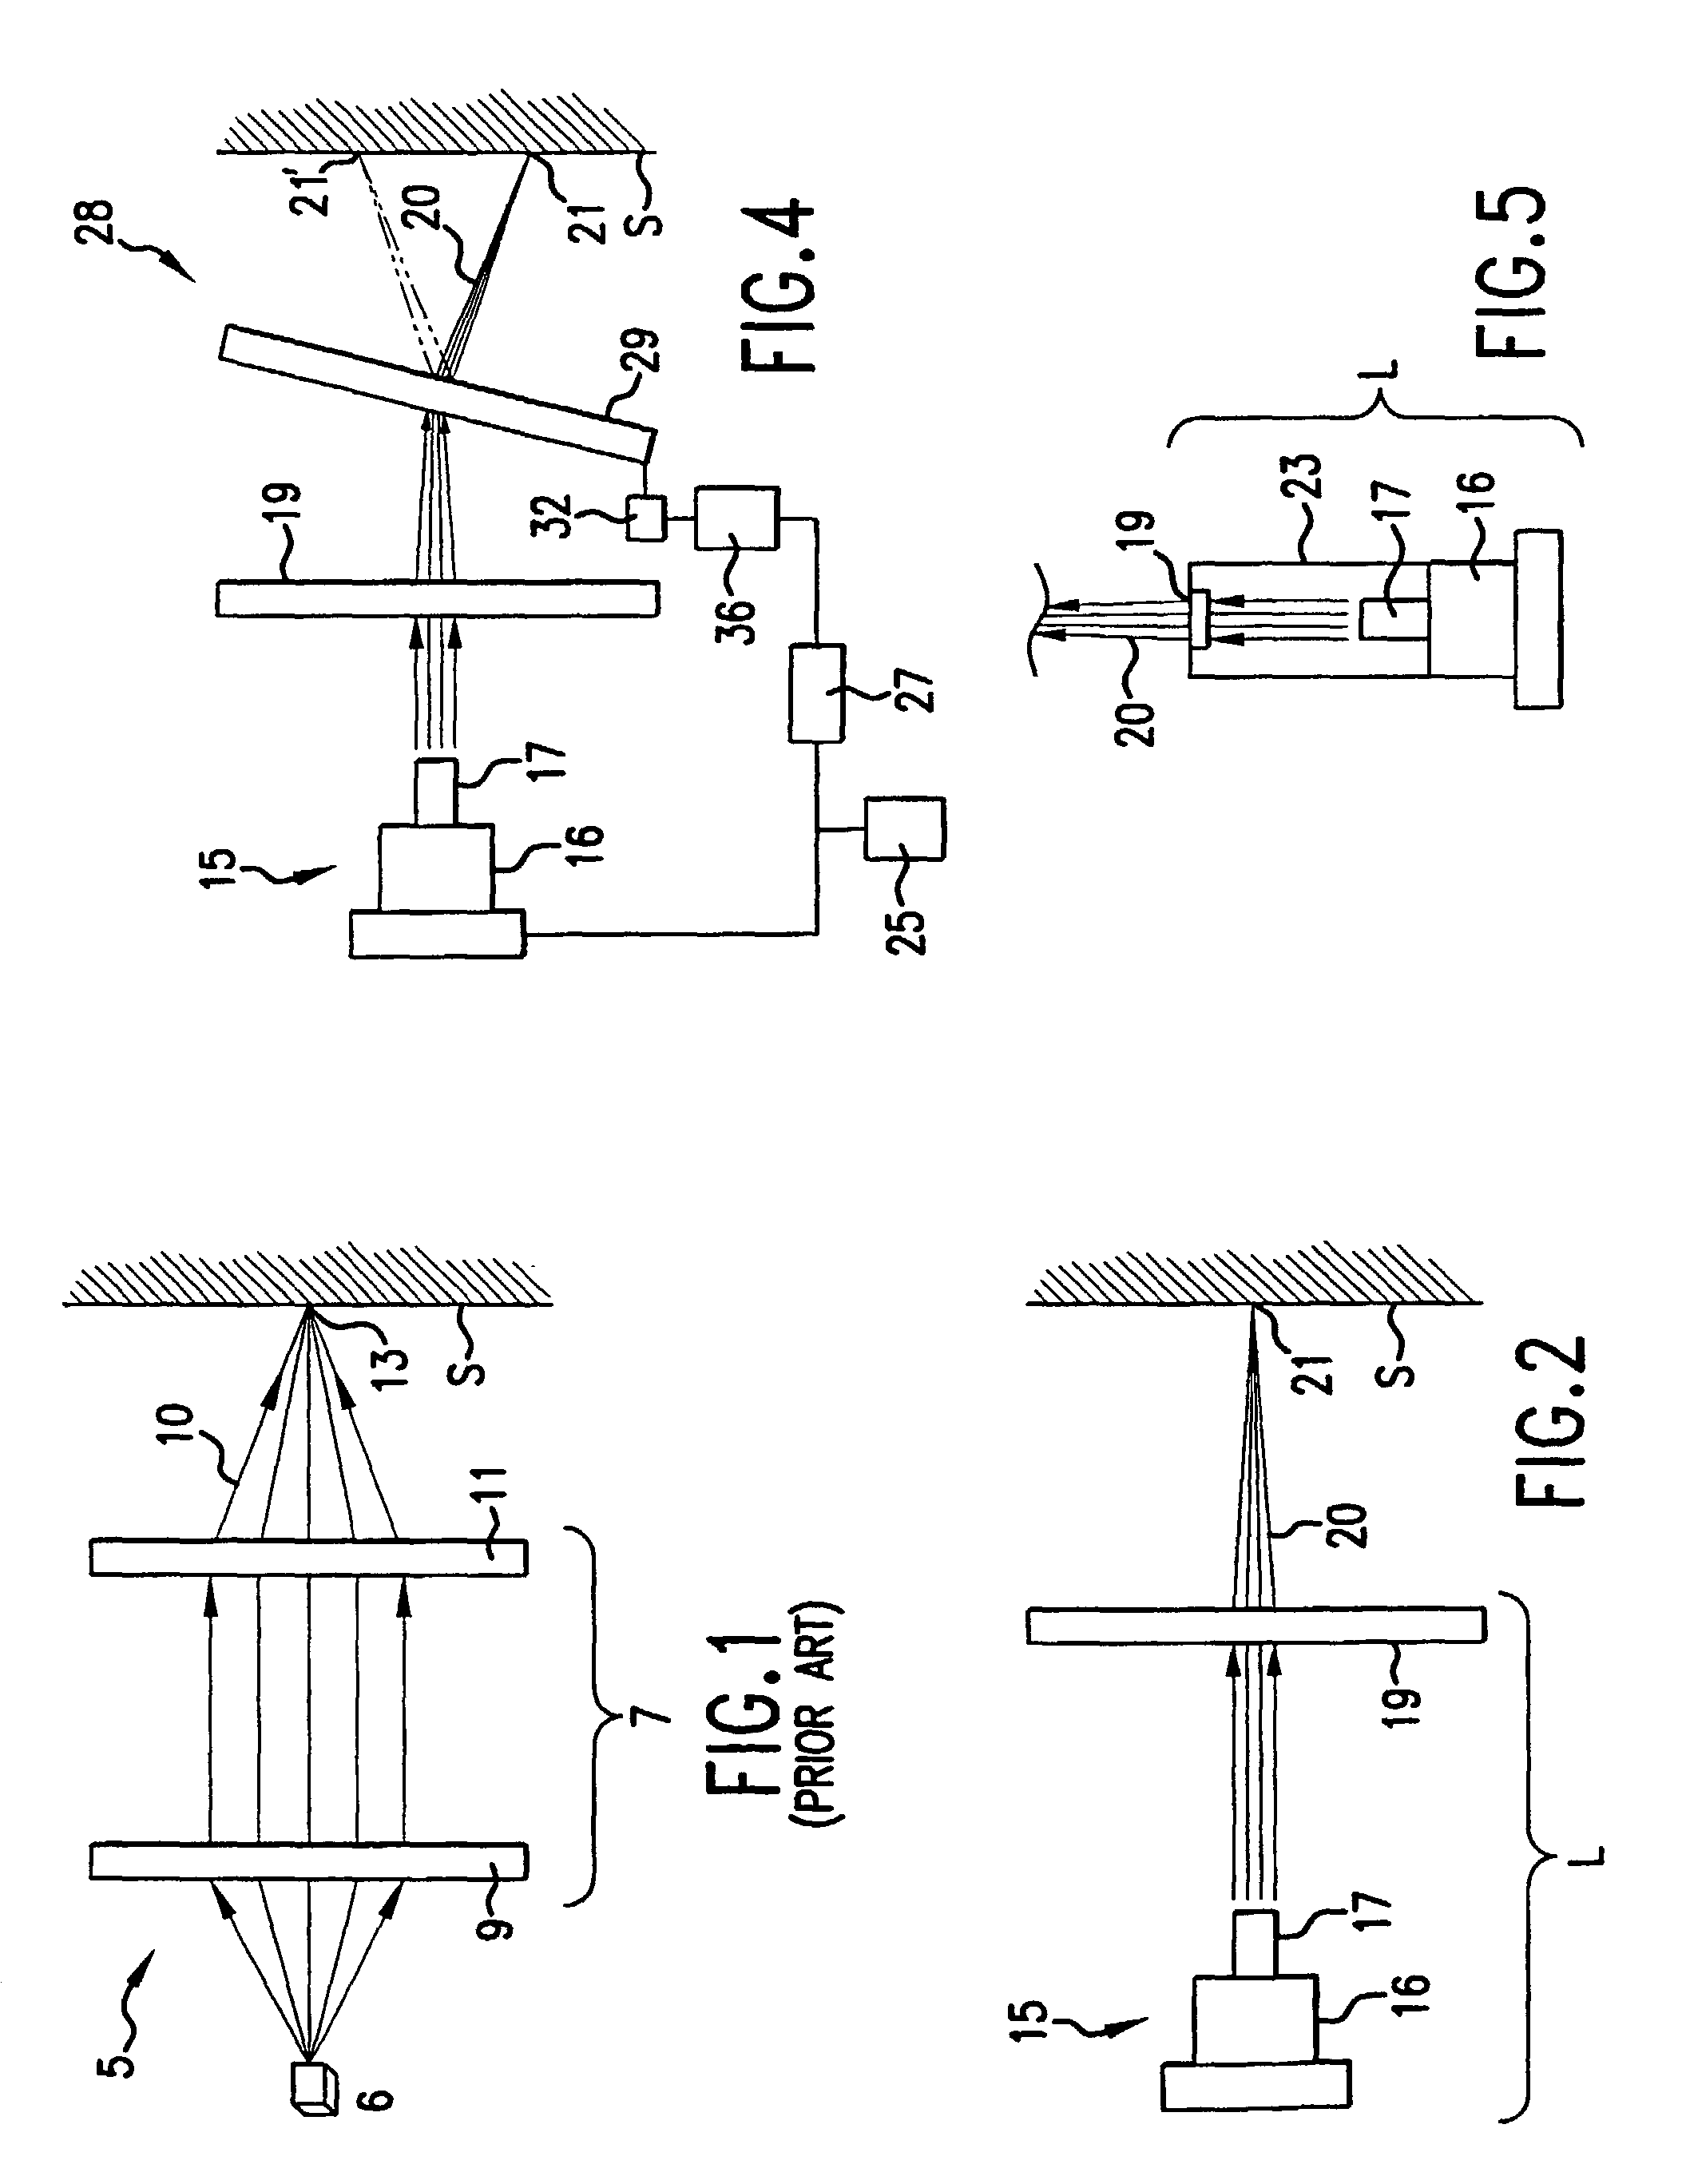 Light beam generation, and focusing and redirecting device